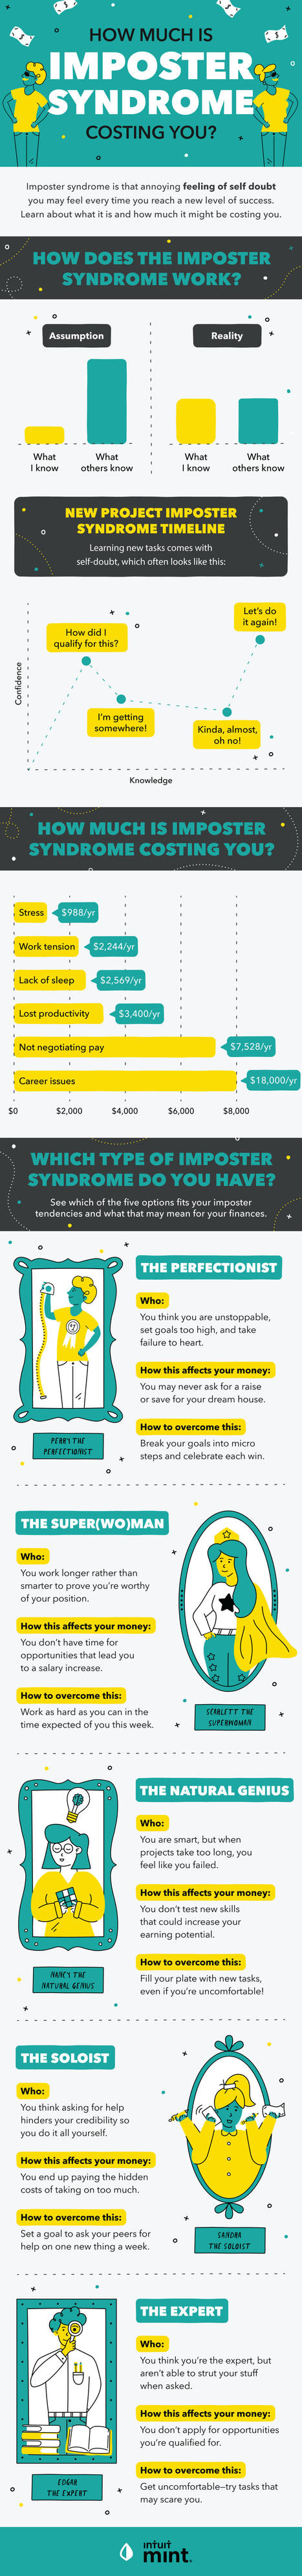 How Imposter Syndrome Costs You Money  | Orientar | Scoop.it